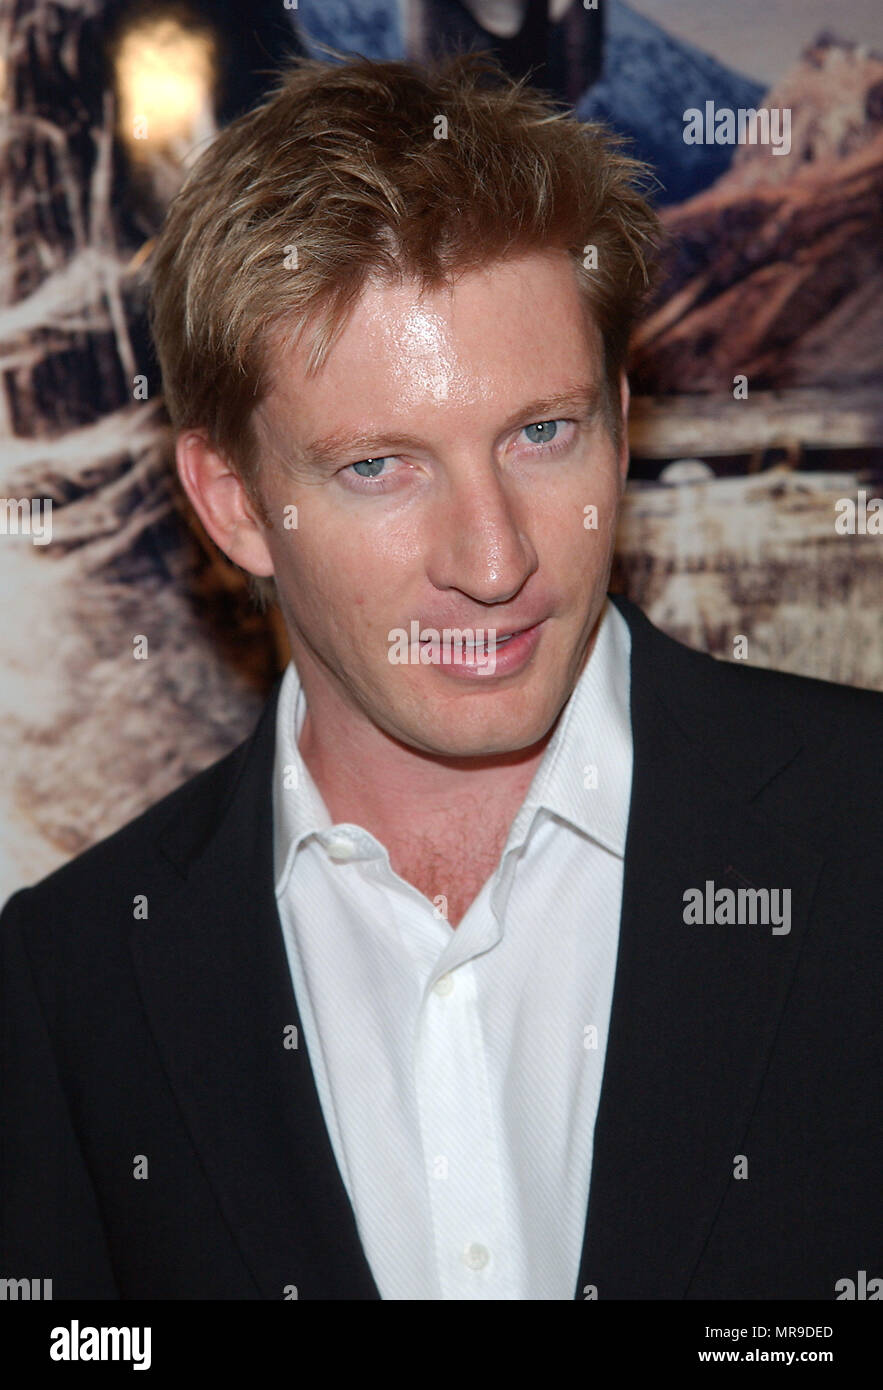 David Wenham arriving at The premiere of 'The Lord Of The Rings: The Two Towers' at the Cineramadome Theatre in Los Angeles. December 15, 2002.WenhamDavid77 Red Carpet Event, Vertical, USA, Film Industry, Celebrities,  Photography, Bestof, Arts Culture and Entertainment, Topix Celebrities fashion /  Vertical, Best of, Event in Hollywood Life - California,  Red Carpet and backstage, USA, Film Industry, Celebrities,  movie celebrities, TV celebrities, Music celebrities, Photography, Bestof, Arts Culture and Entertainment,  Topix, headshot, vertical, one person,, from the year , 2002, inquiry tsu Stock Photo